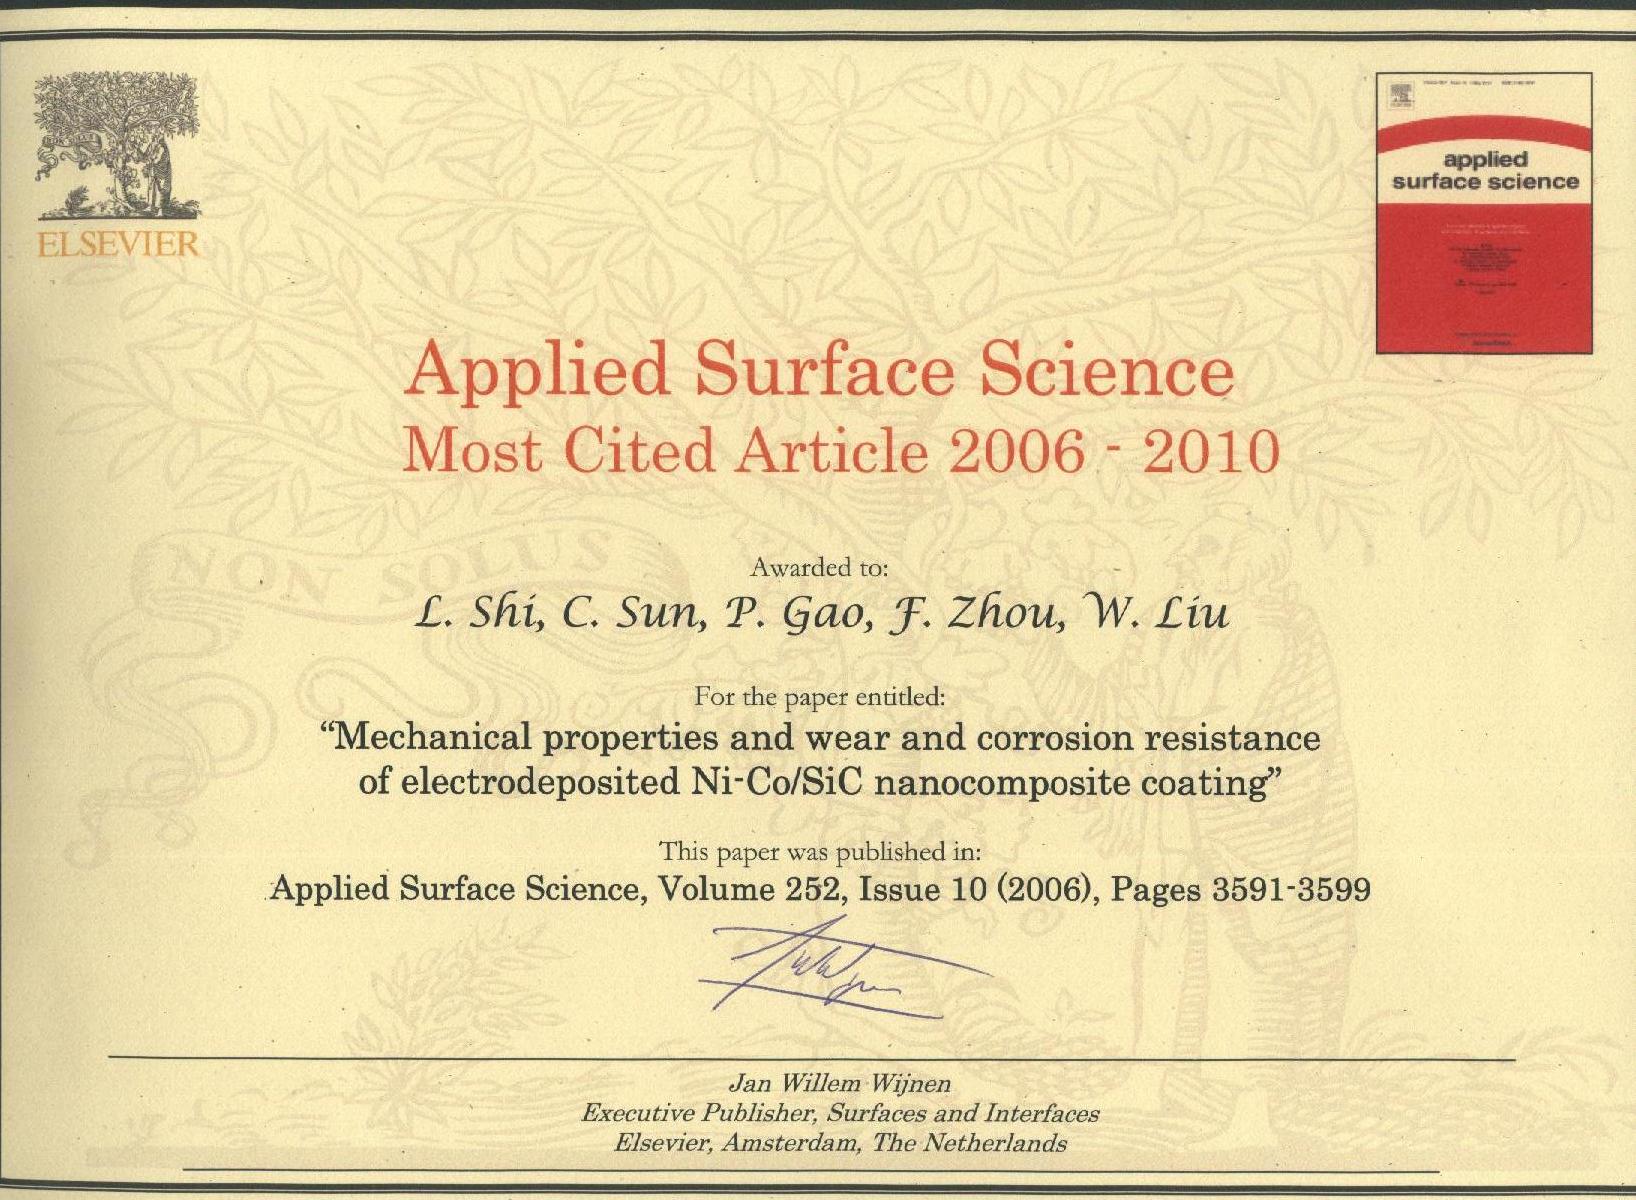 applied surface science cover letter